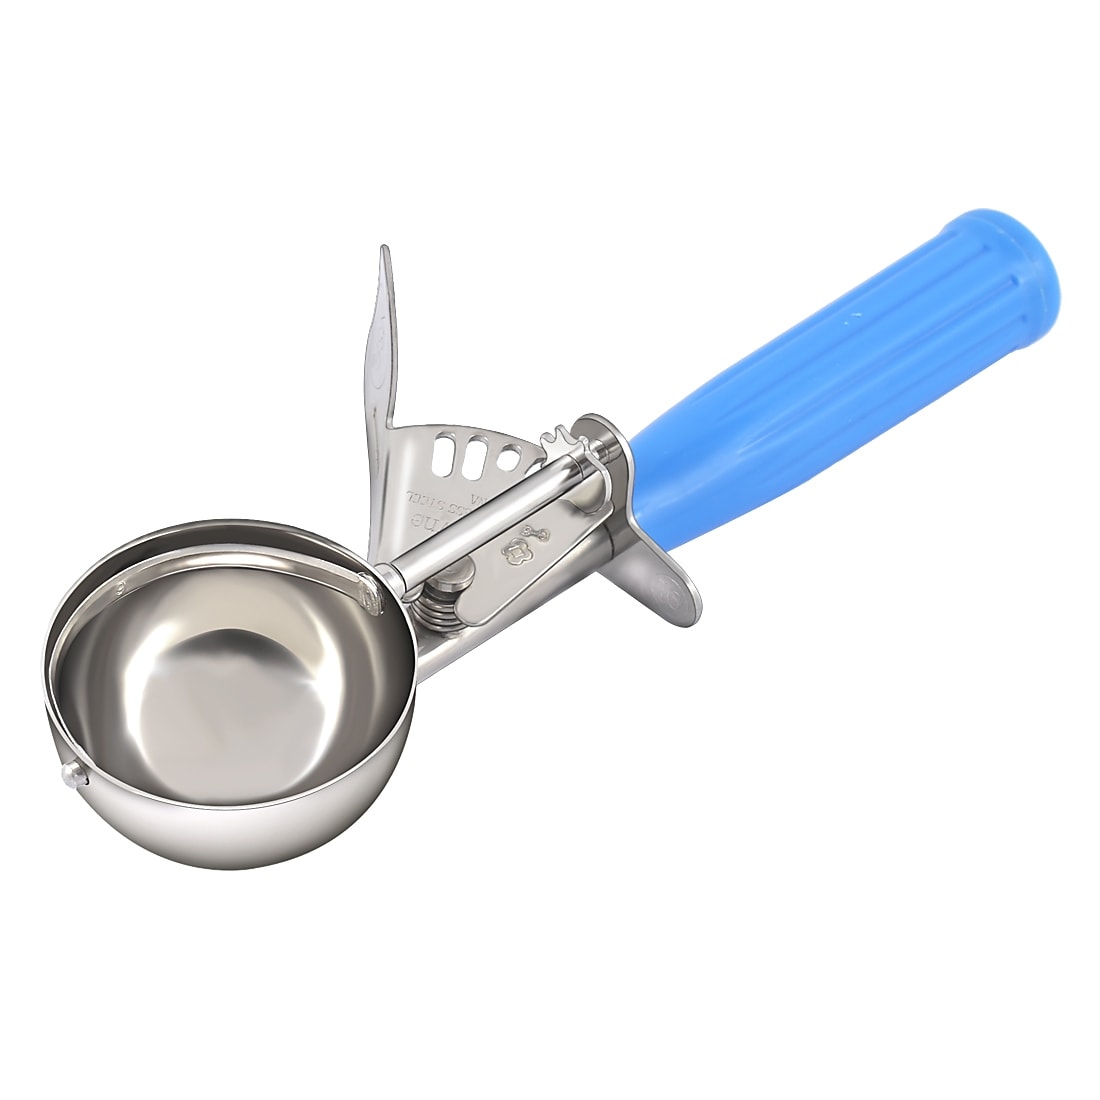 https://ak1.ostkcdn.com/images/products/is/images/direct/ebbf58e560ece430cff5121780a4e05d73b91ca7/Stainless-Steel-Squeeze-Ice-Cream-Disher-Scoop-Spoon-Tool-DP-16-2-3-4-oz-Blue.jpg